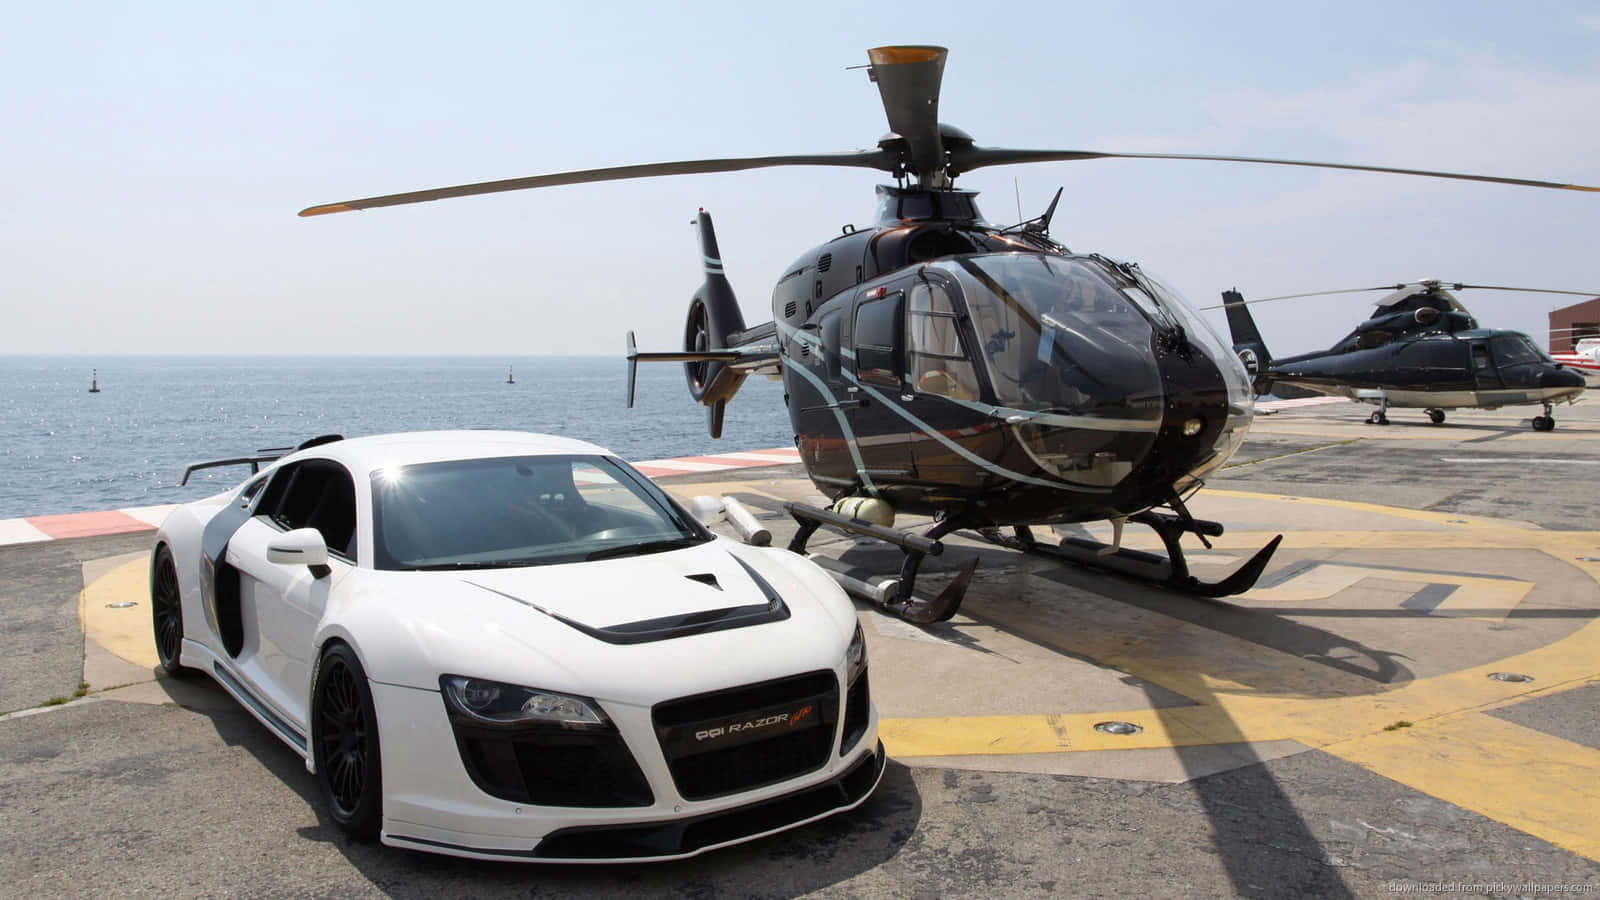 Cool Helicopter And Audi R8 Car Wallpaper